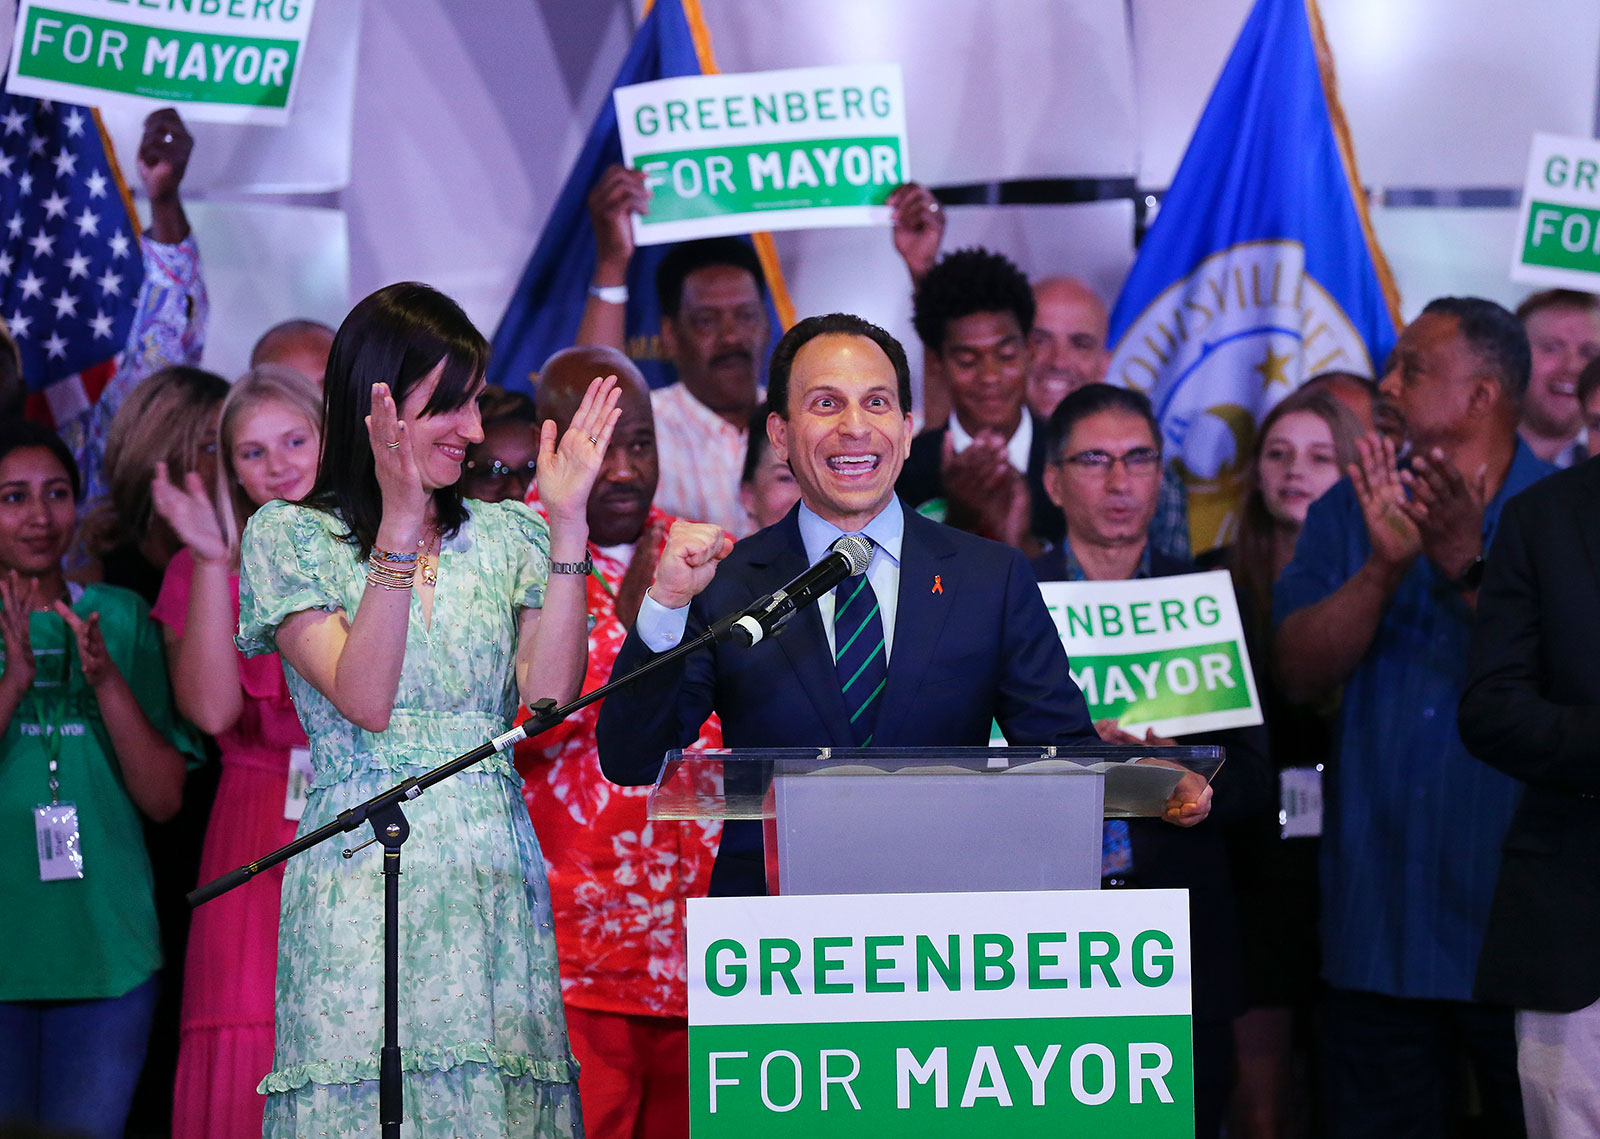 Craig Greenberg acknowledges the crowd after winning the Democratic primary for Louisville mayor in Louisville, Kentucky on Tuesday, May 17.